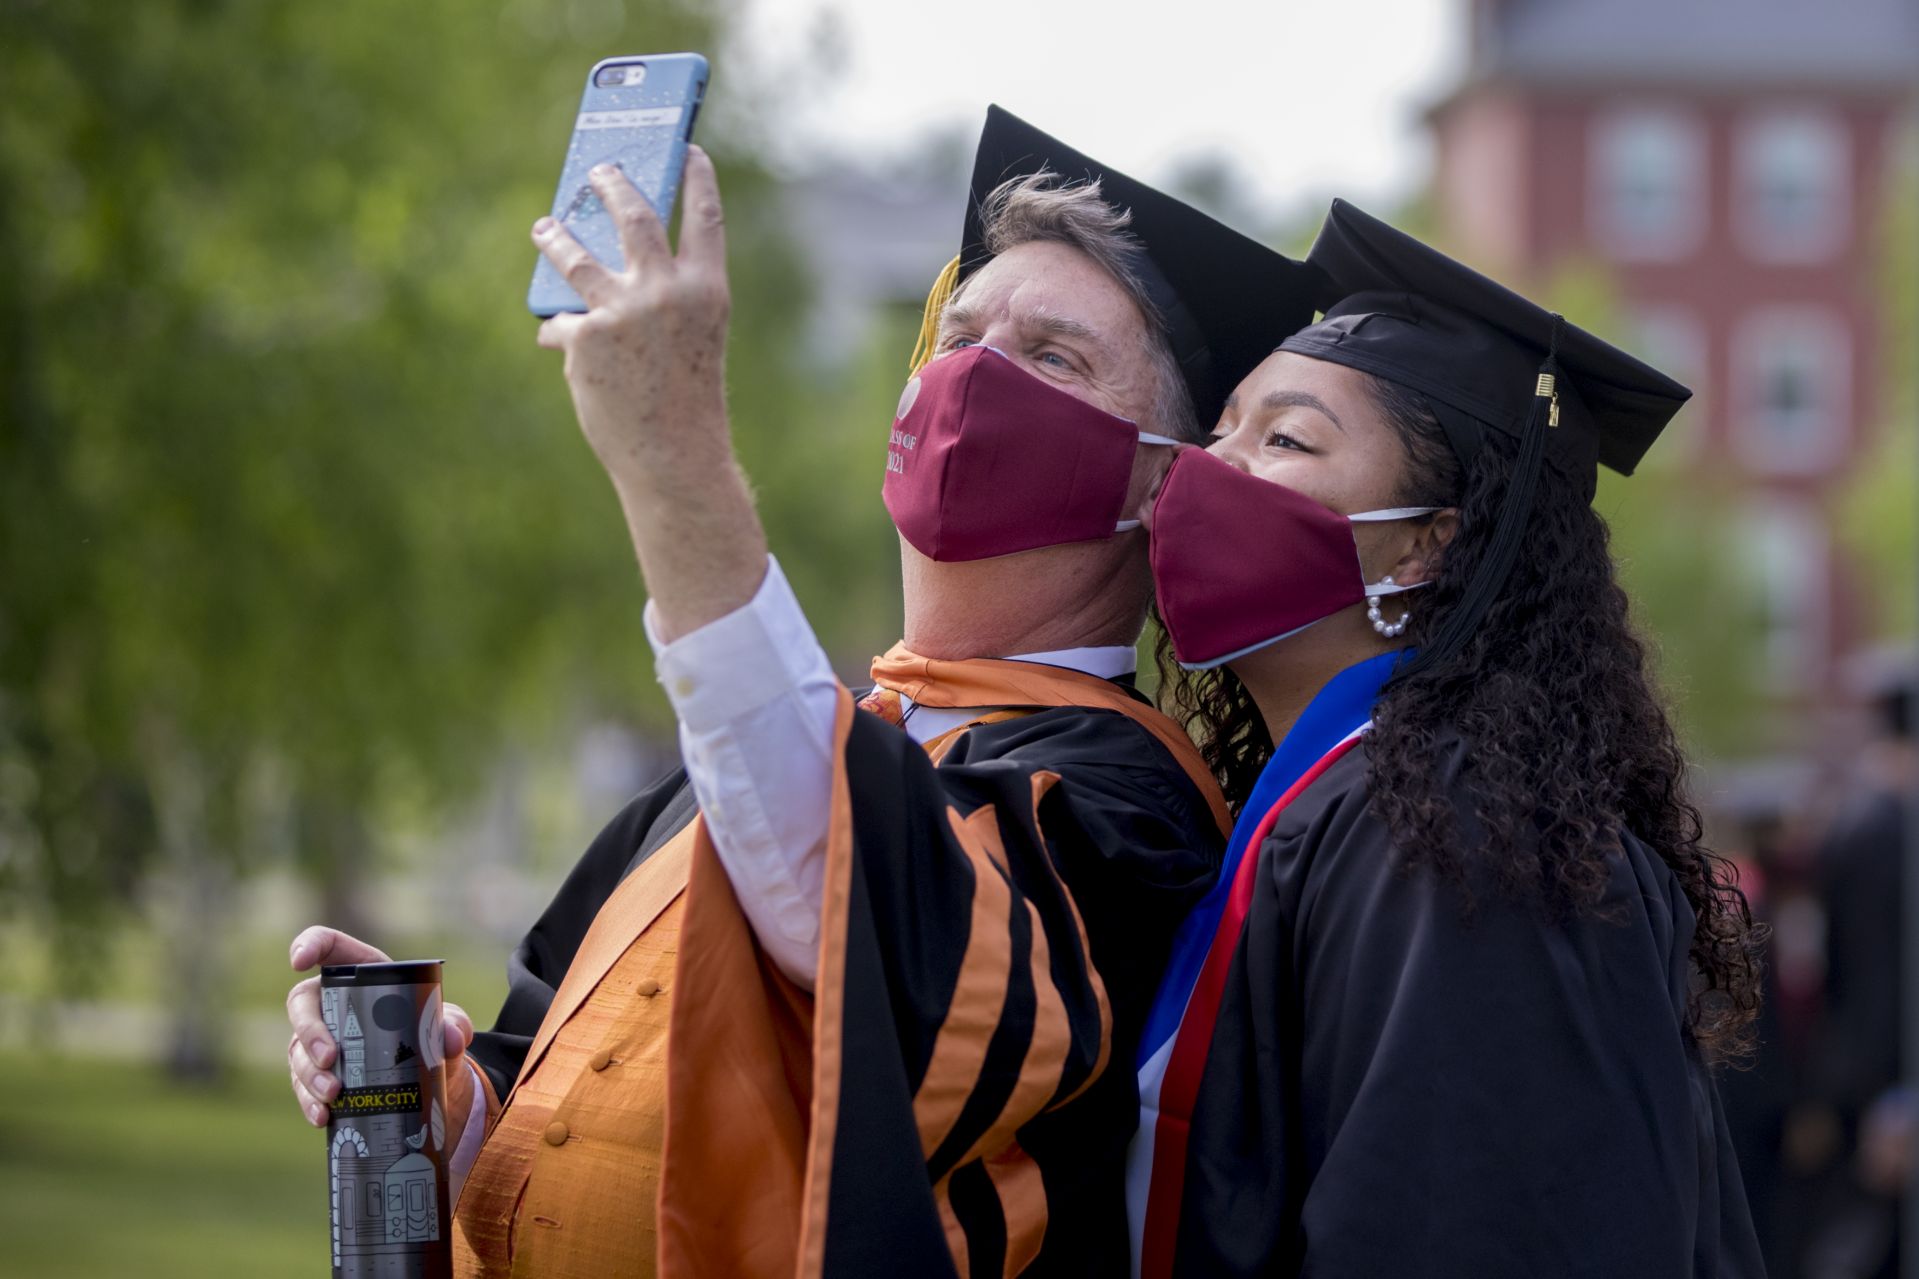 Scenes from the morning Commencement at Bates College on May 27, 2021. (Phyllis Graber Jensen/Bates College)